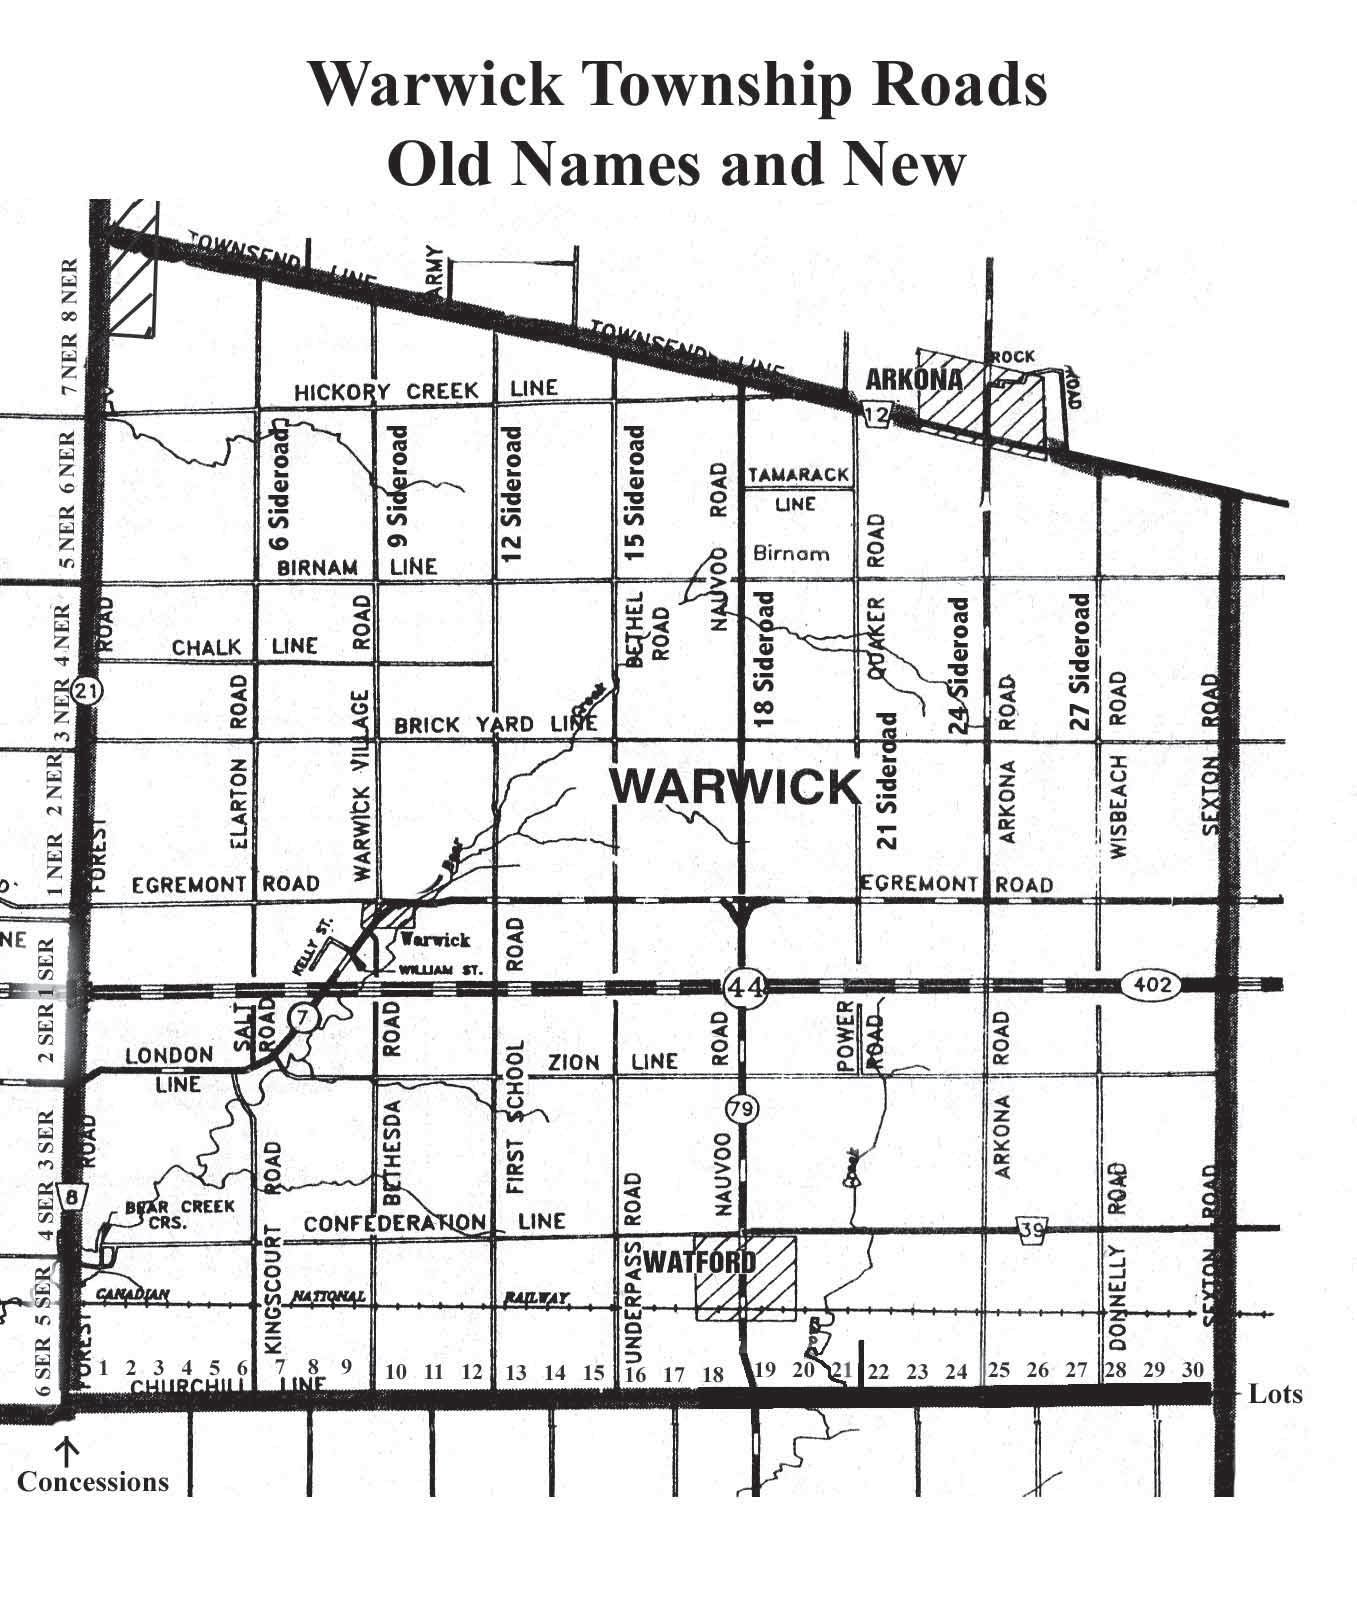 Map with title, "Warwick Township Roads Old Names and New".